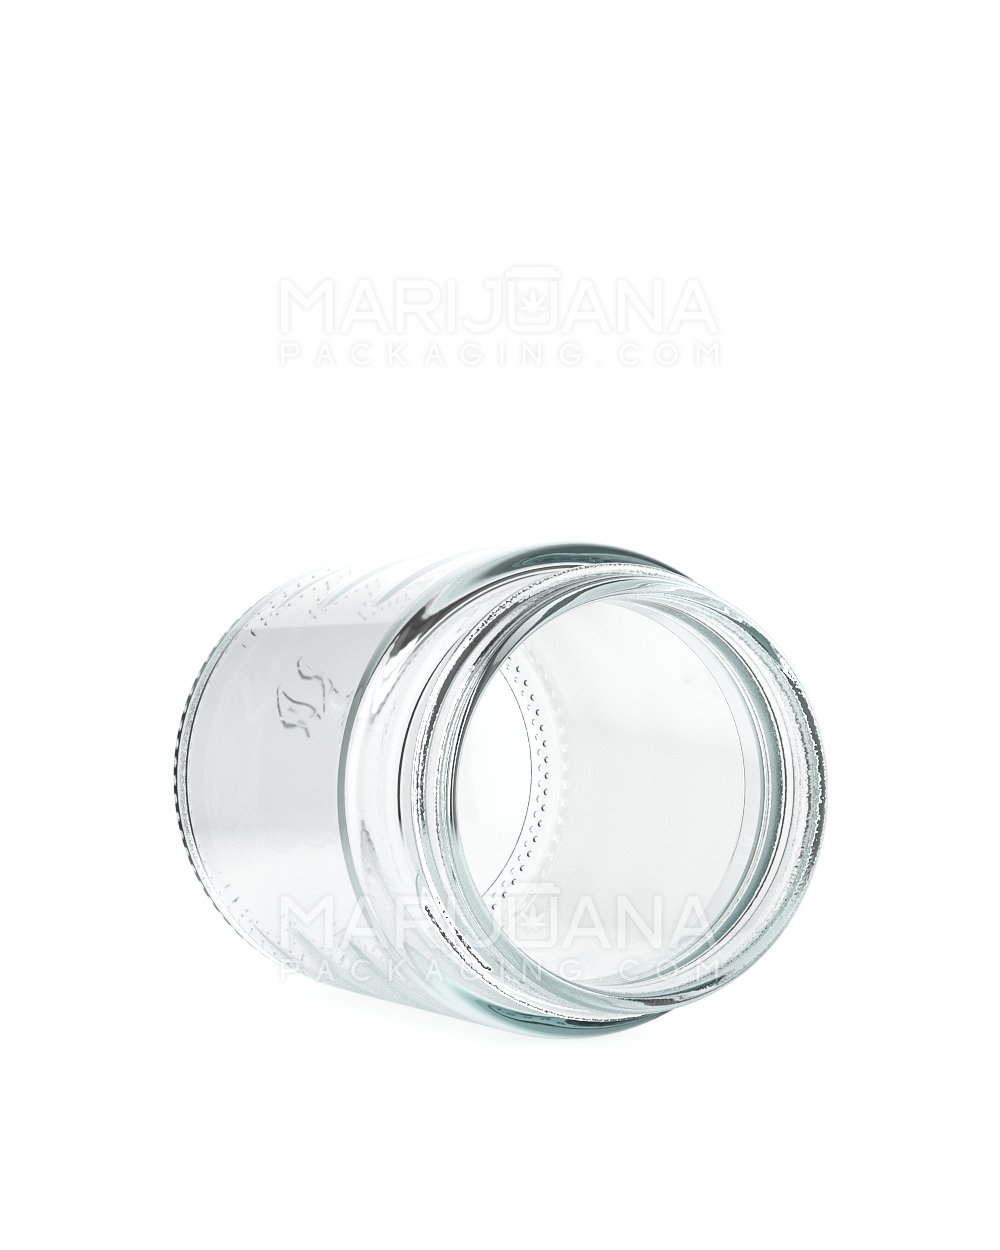 Straight Sided Clear Glass Jars with Black Cap | 53mm - 4oz - 120 Count - 4